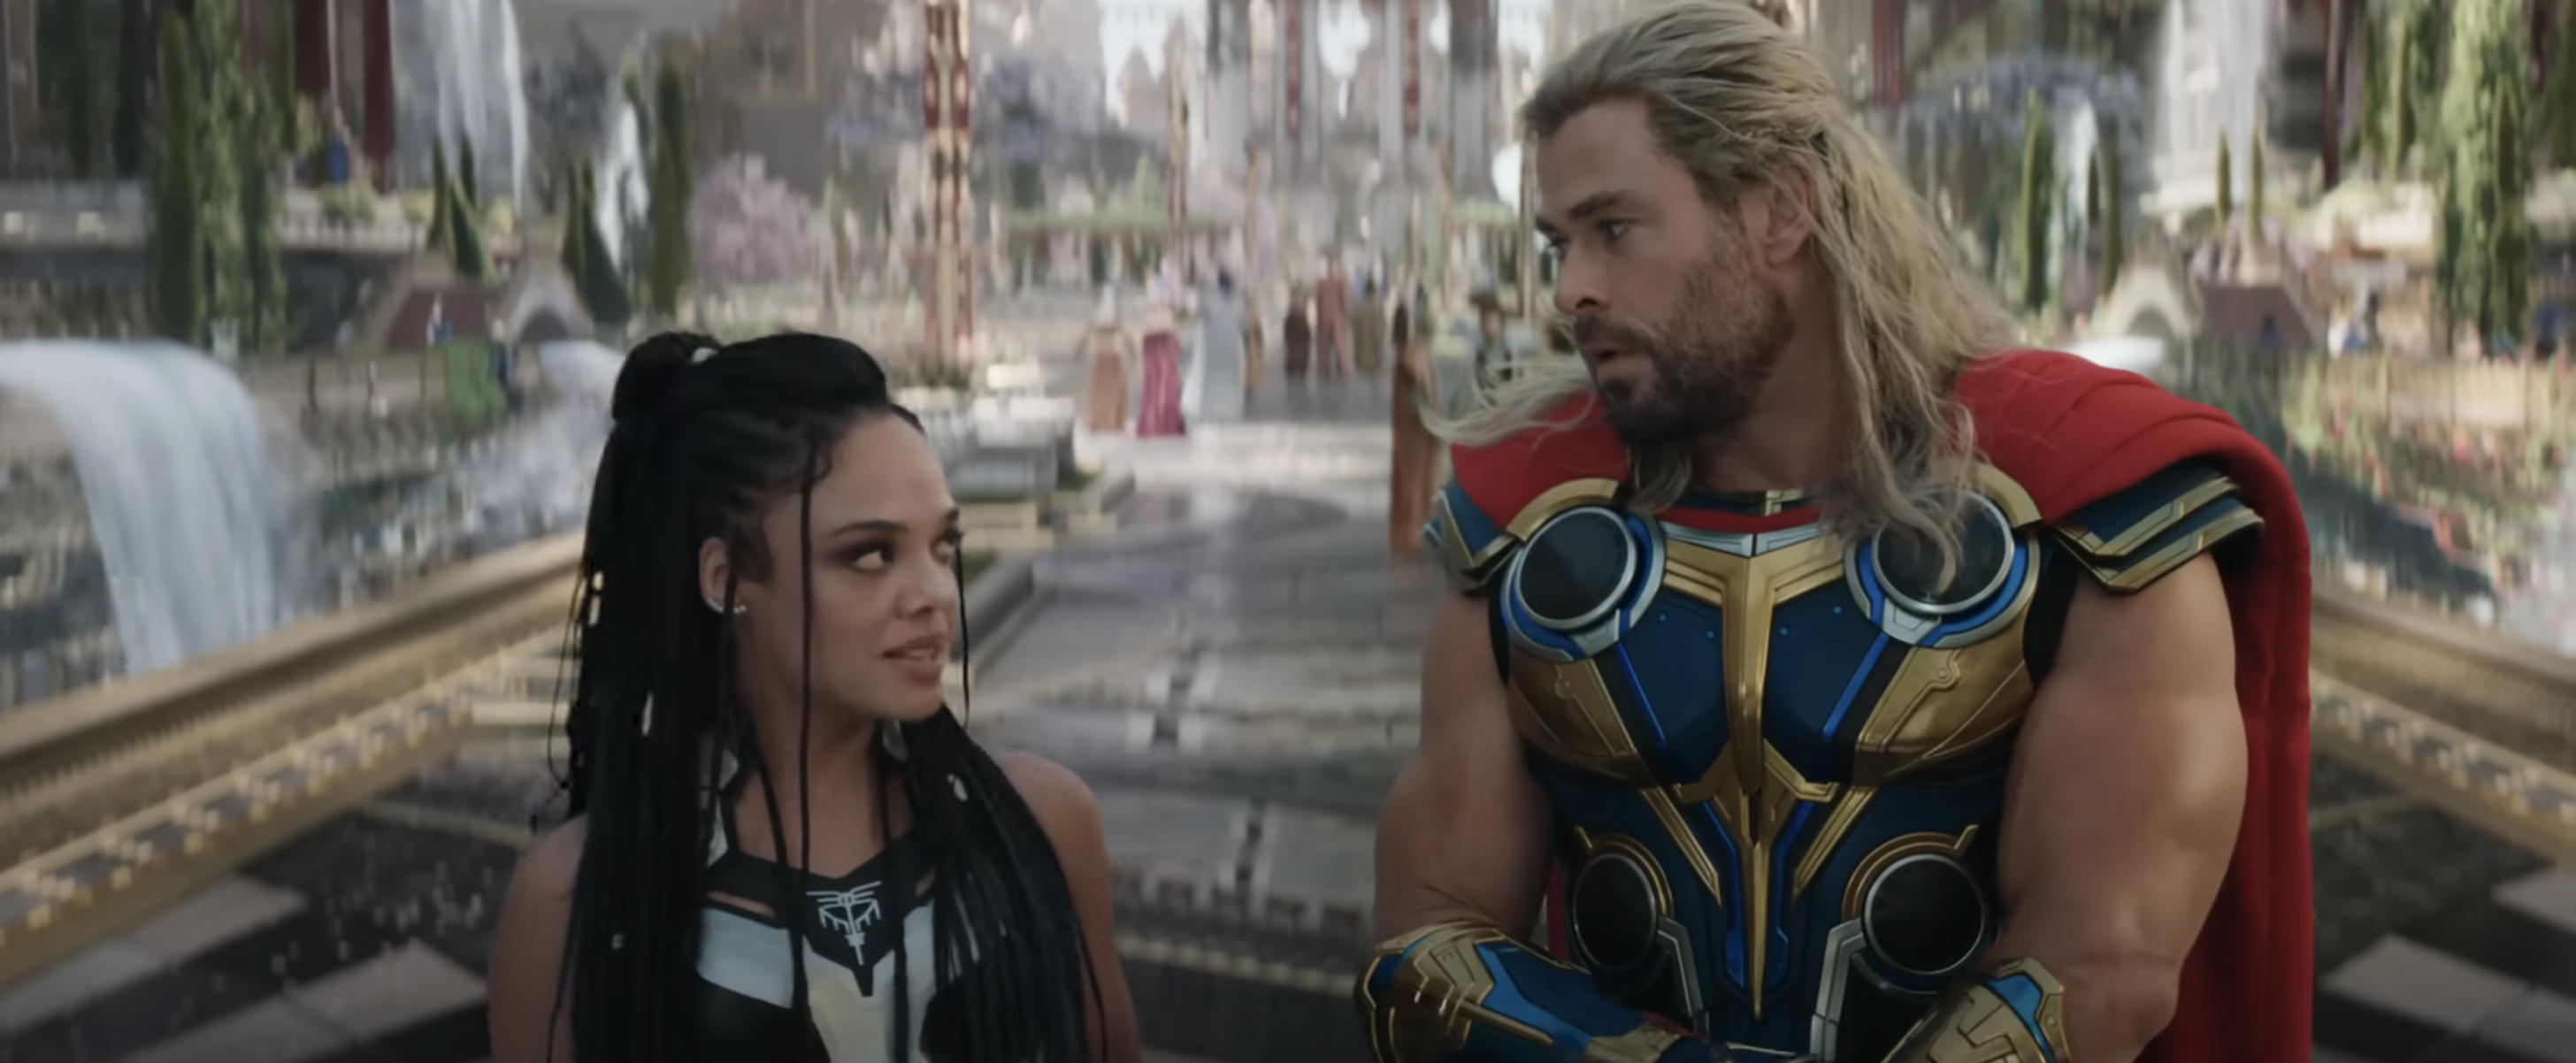 Valkyrie and Thor in armor stand together with a futuristic cityscape in the background